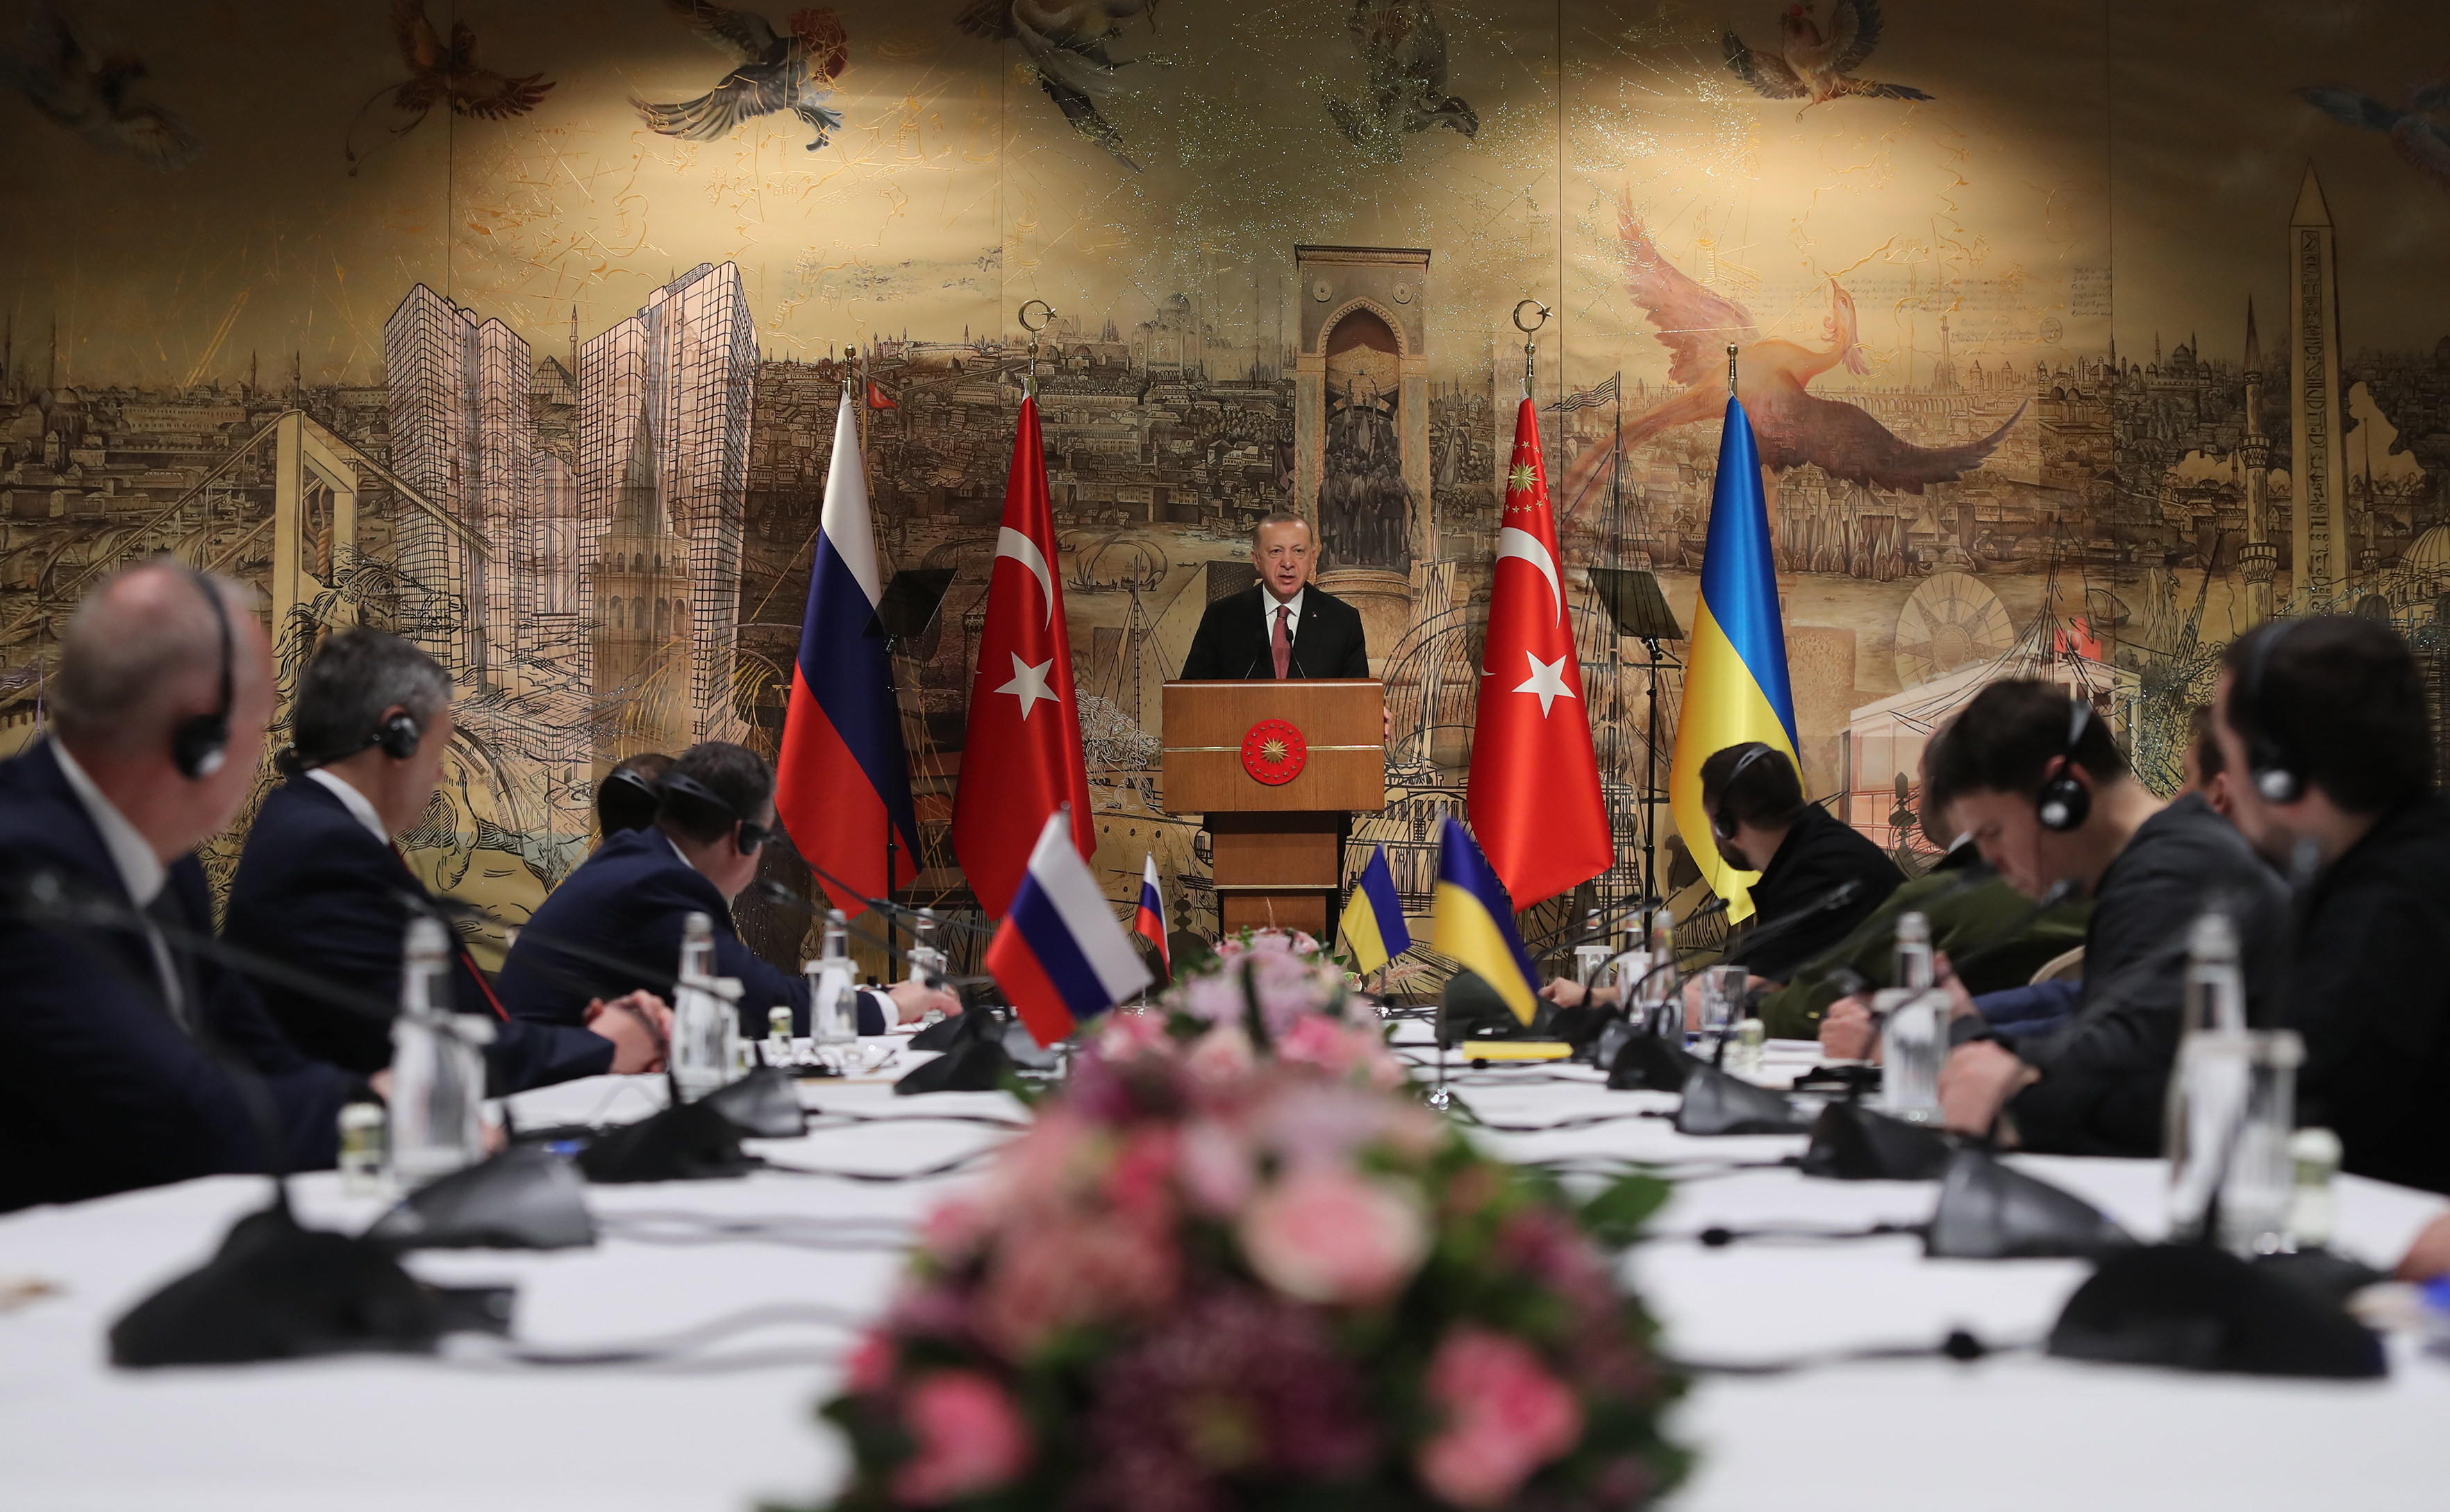 Turkish President Recep Tayyip Erdogan speaks ahead of the peace talks between delegations from Russia and Ukraine at Dolmabahce Presidential Office in Istanbul, Turkey, on March 29.